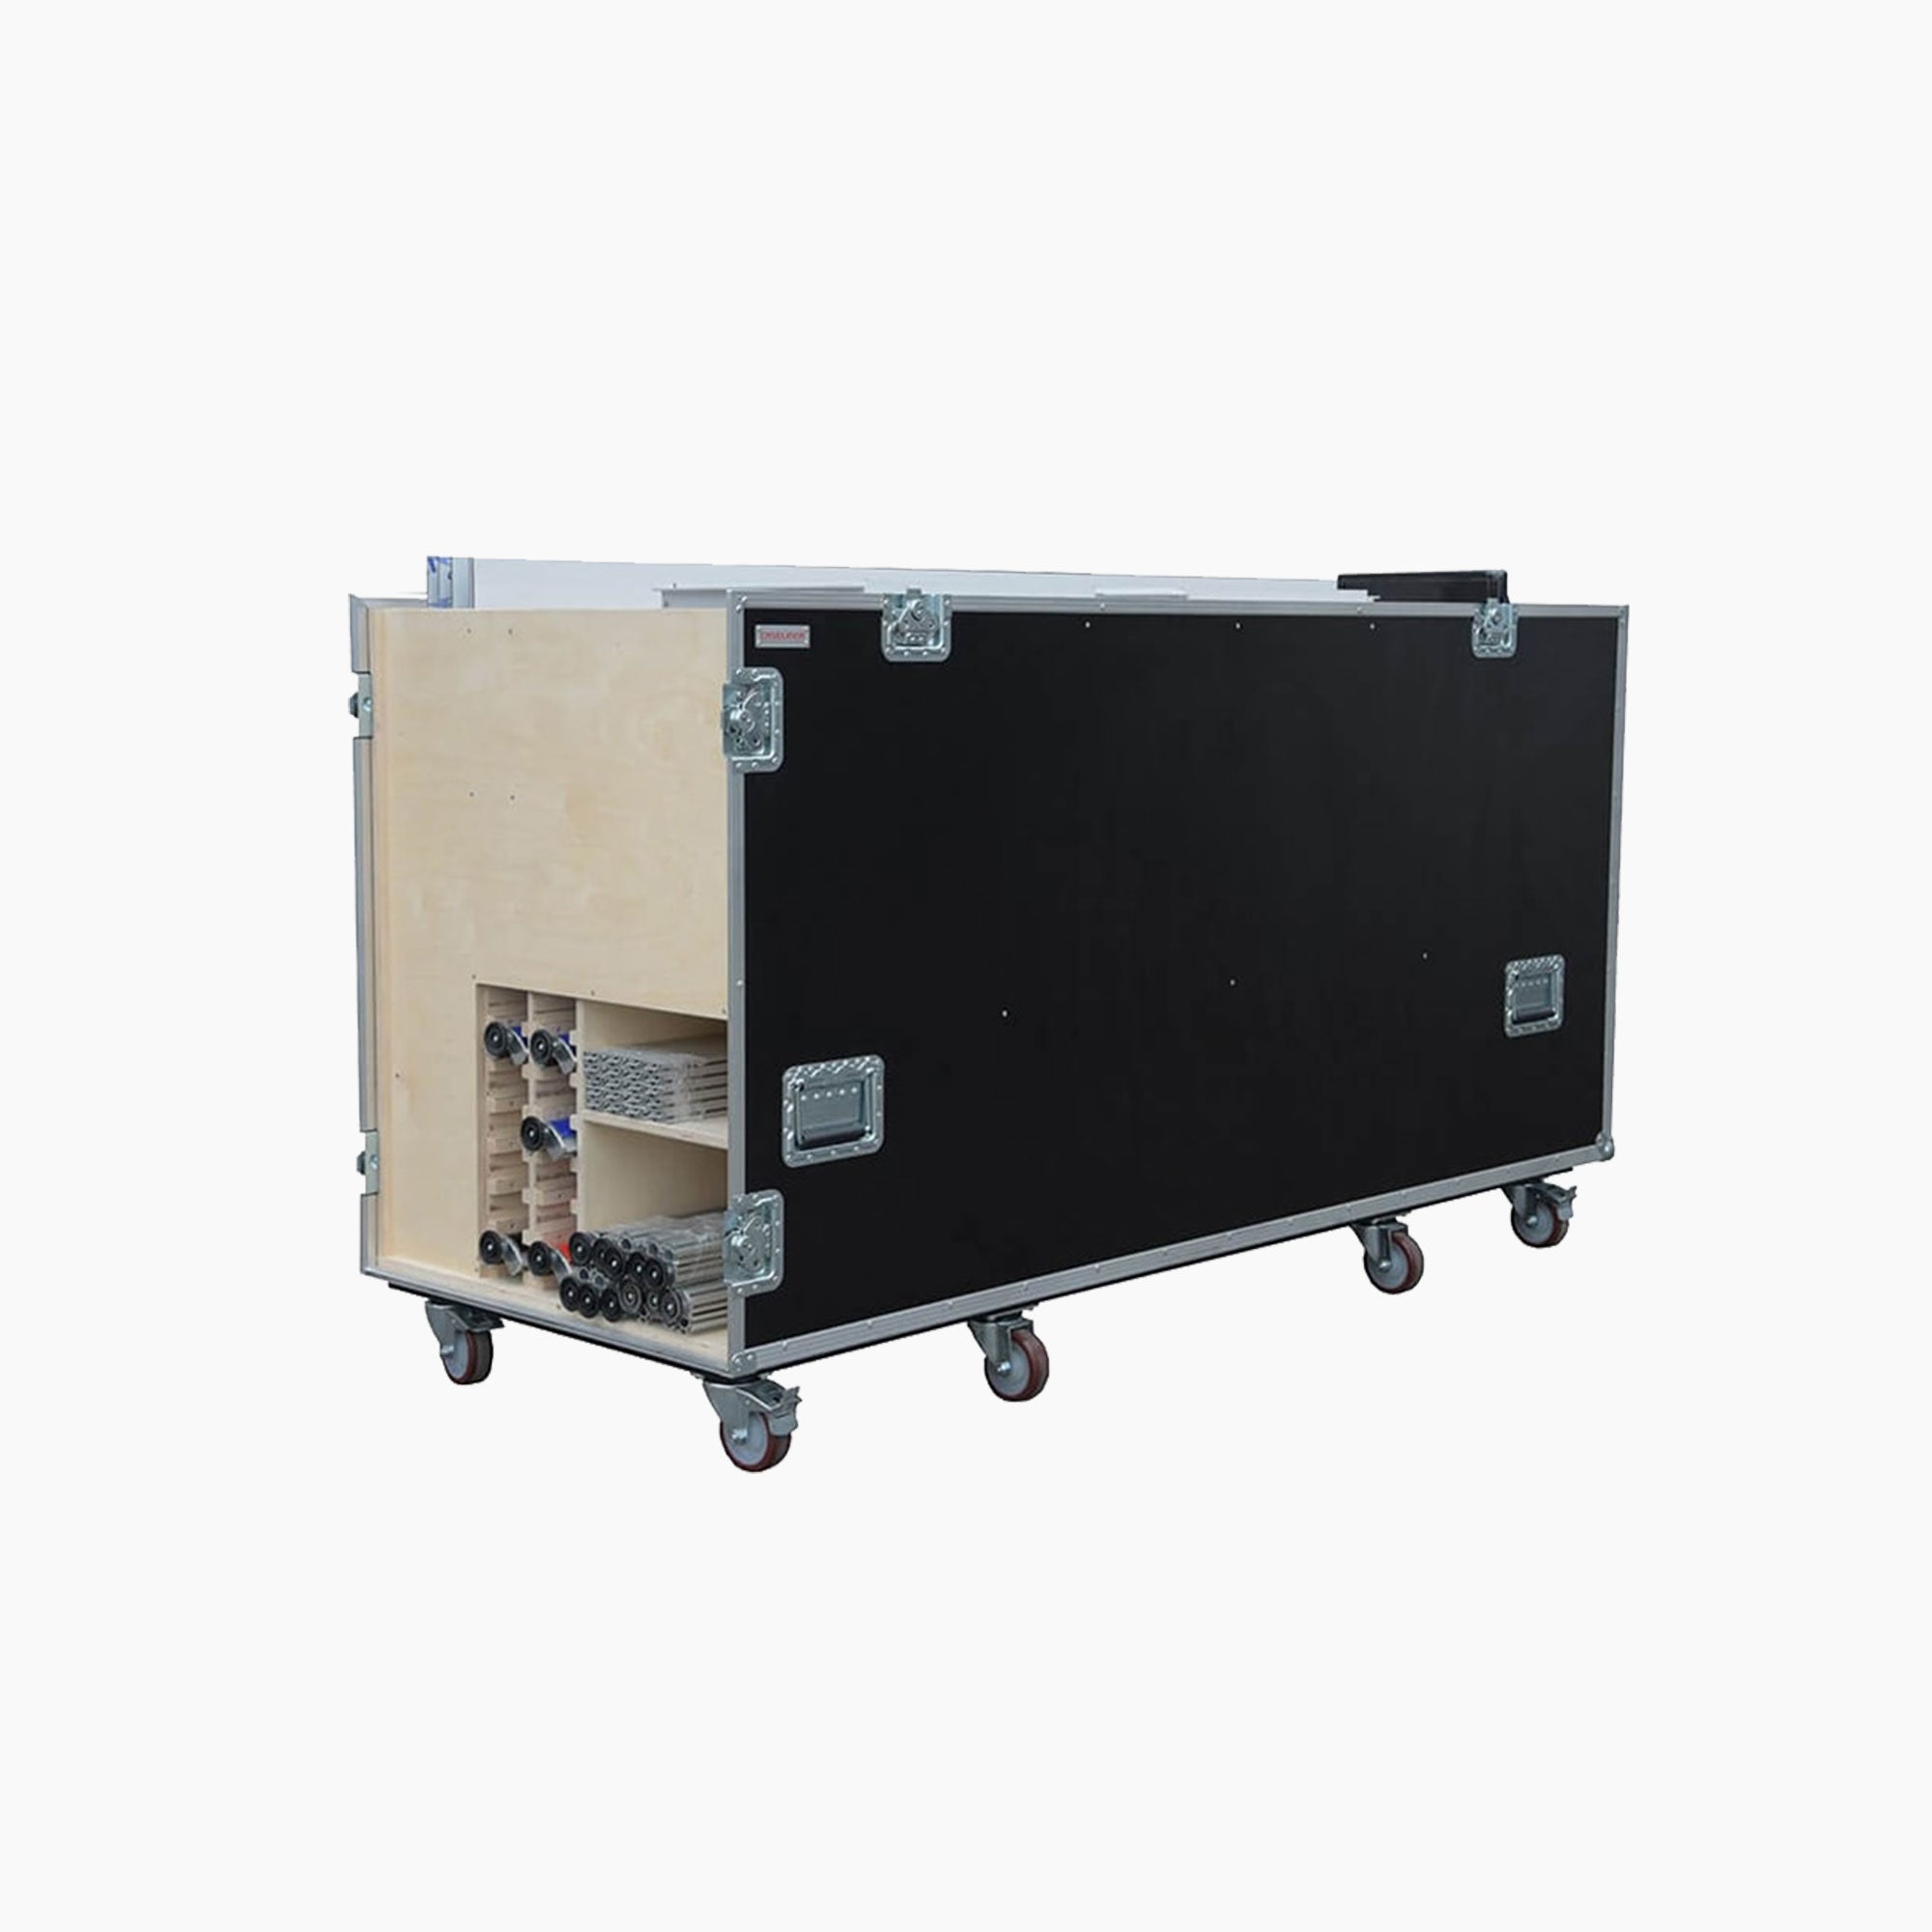 Caseliner | MAGSEAM Walling Flight Case-Magseam Walling-Caseliner-gpx-store